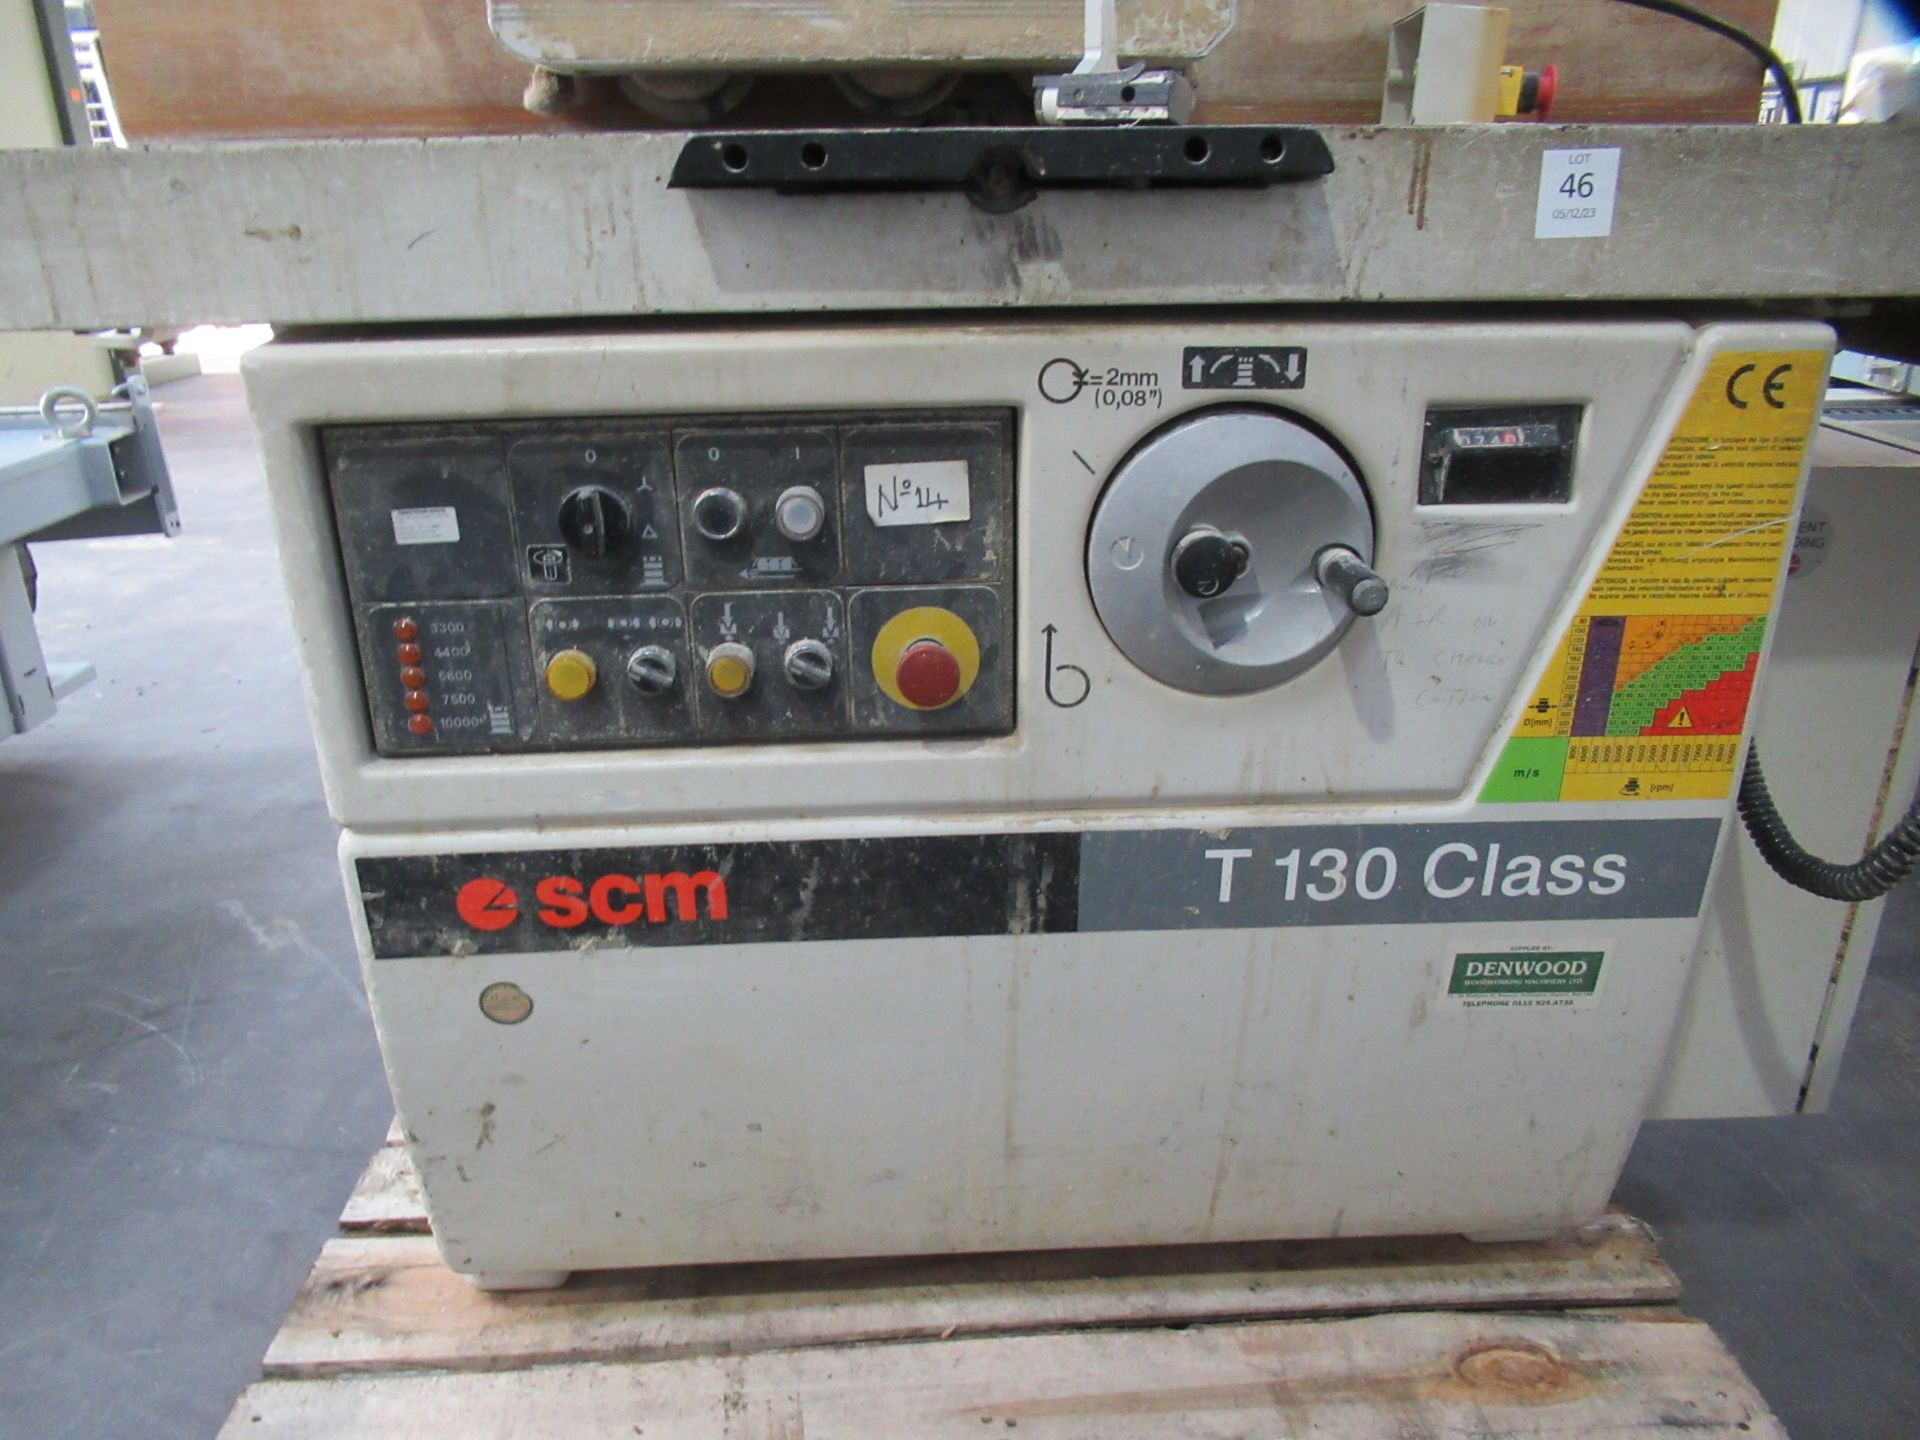 SCM T130 Class Spindle Moulder - 3ph - with Maggi Steff 2034 Powered Roller Feed - Image 4 of 9